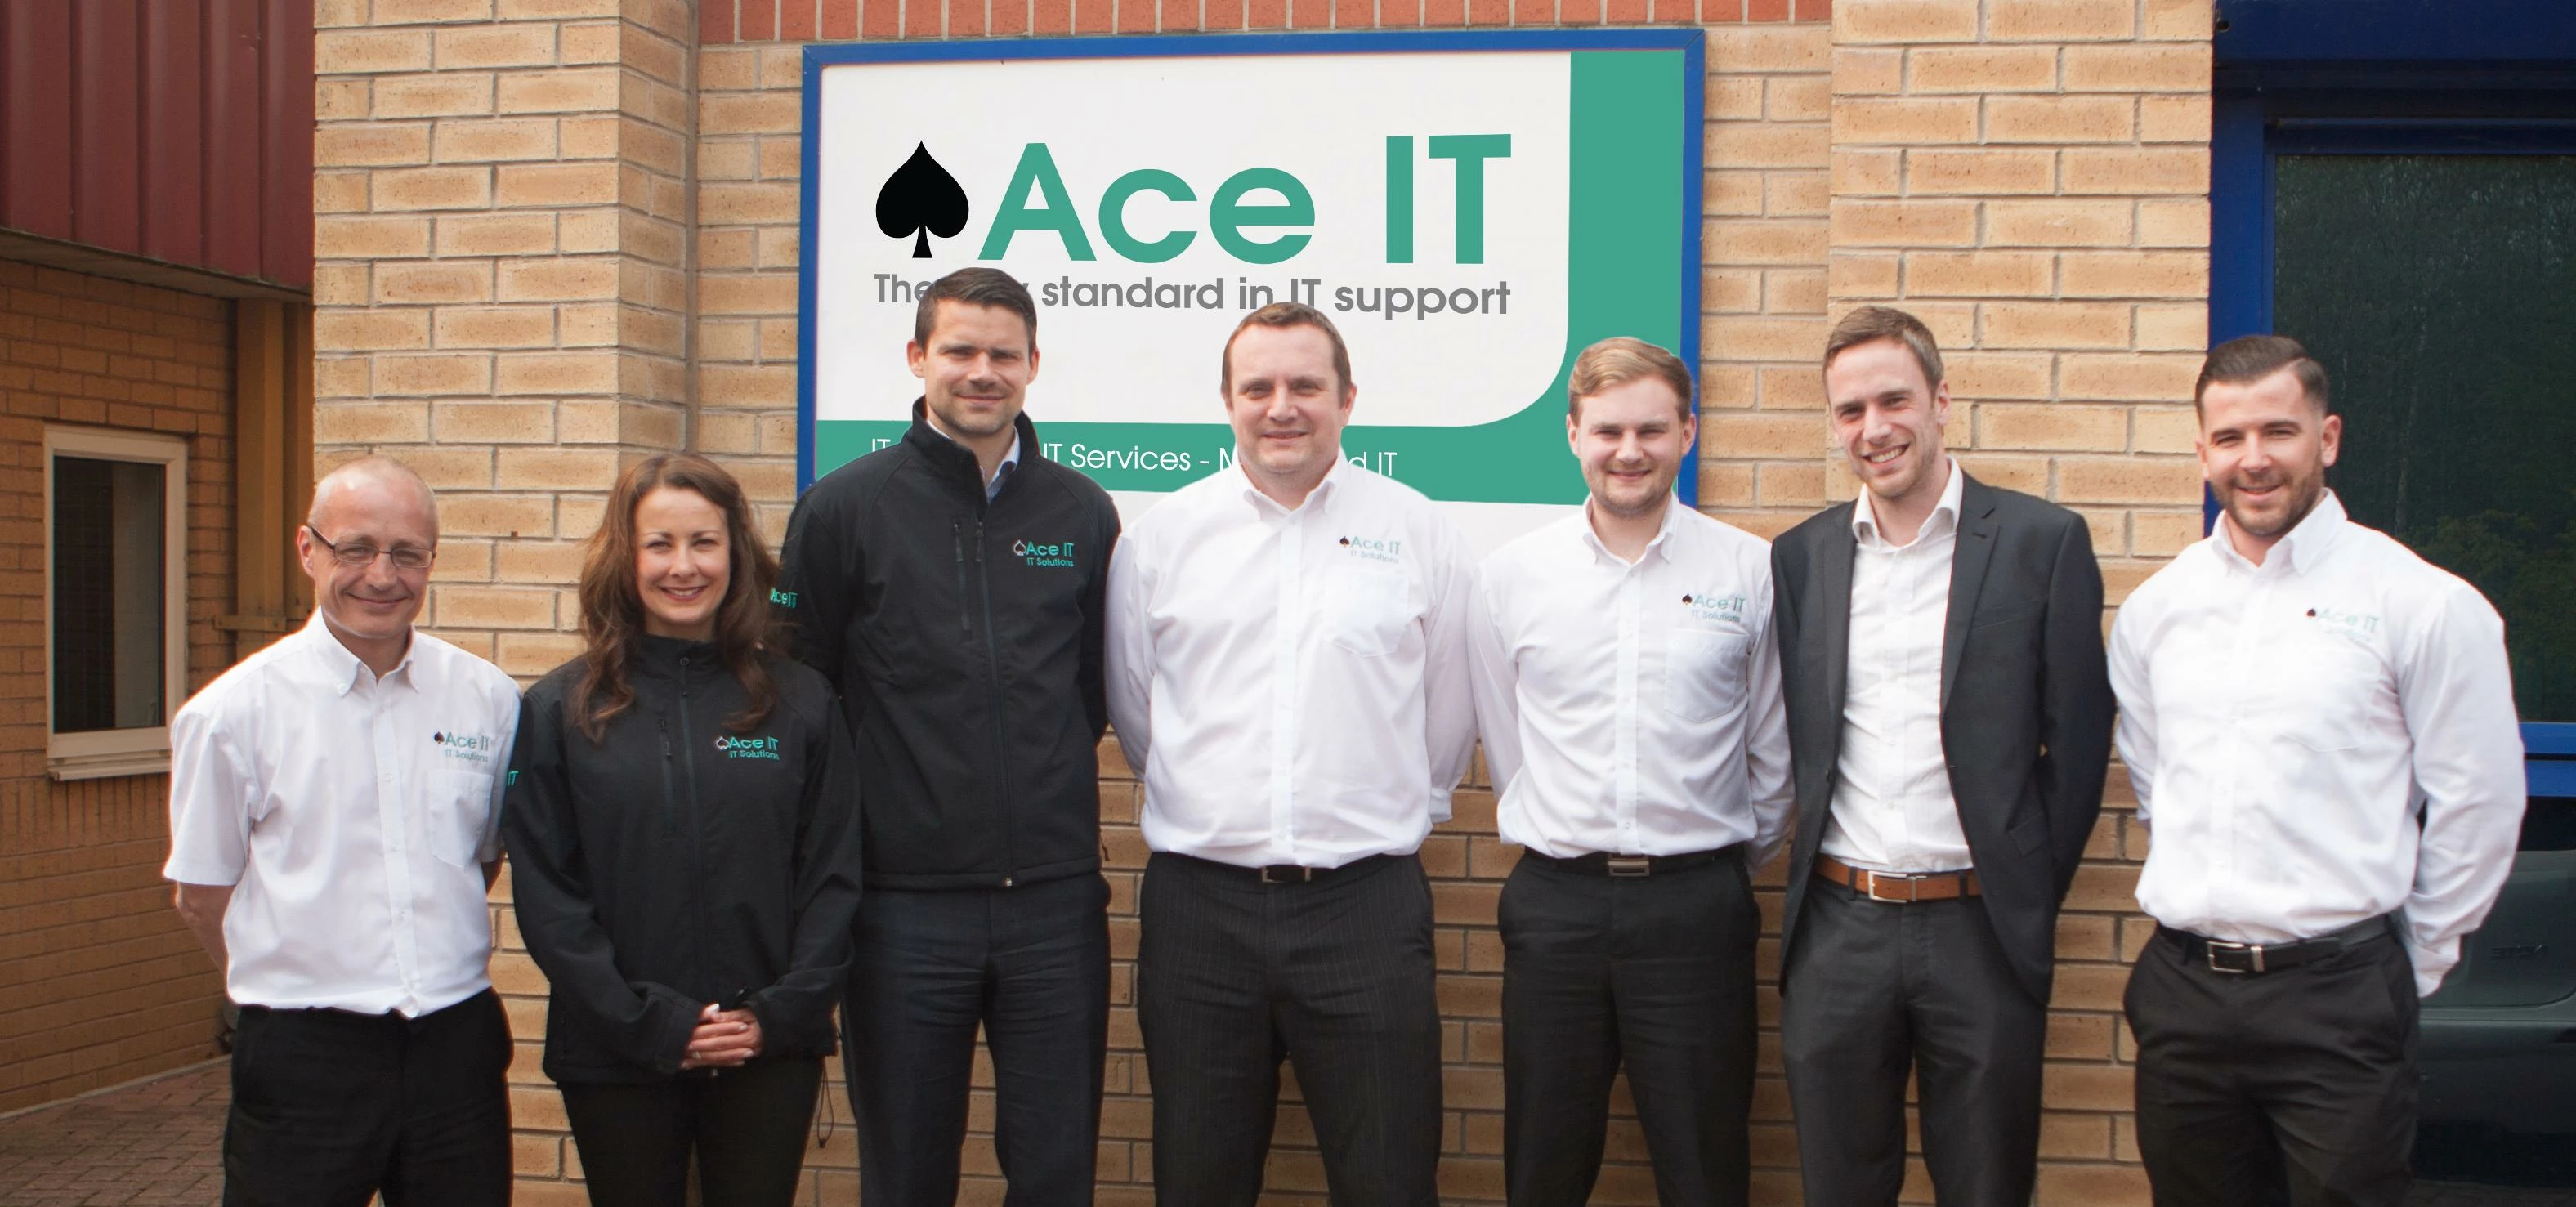 The ACE IT team